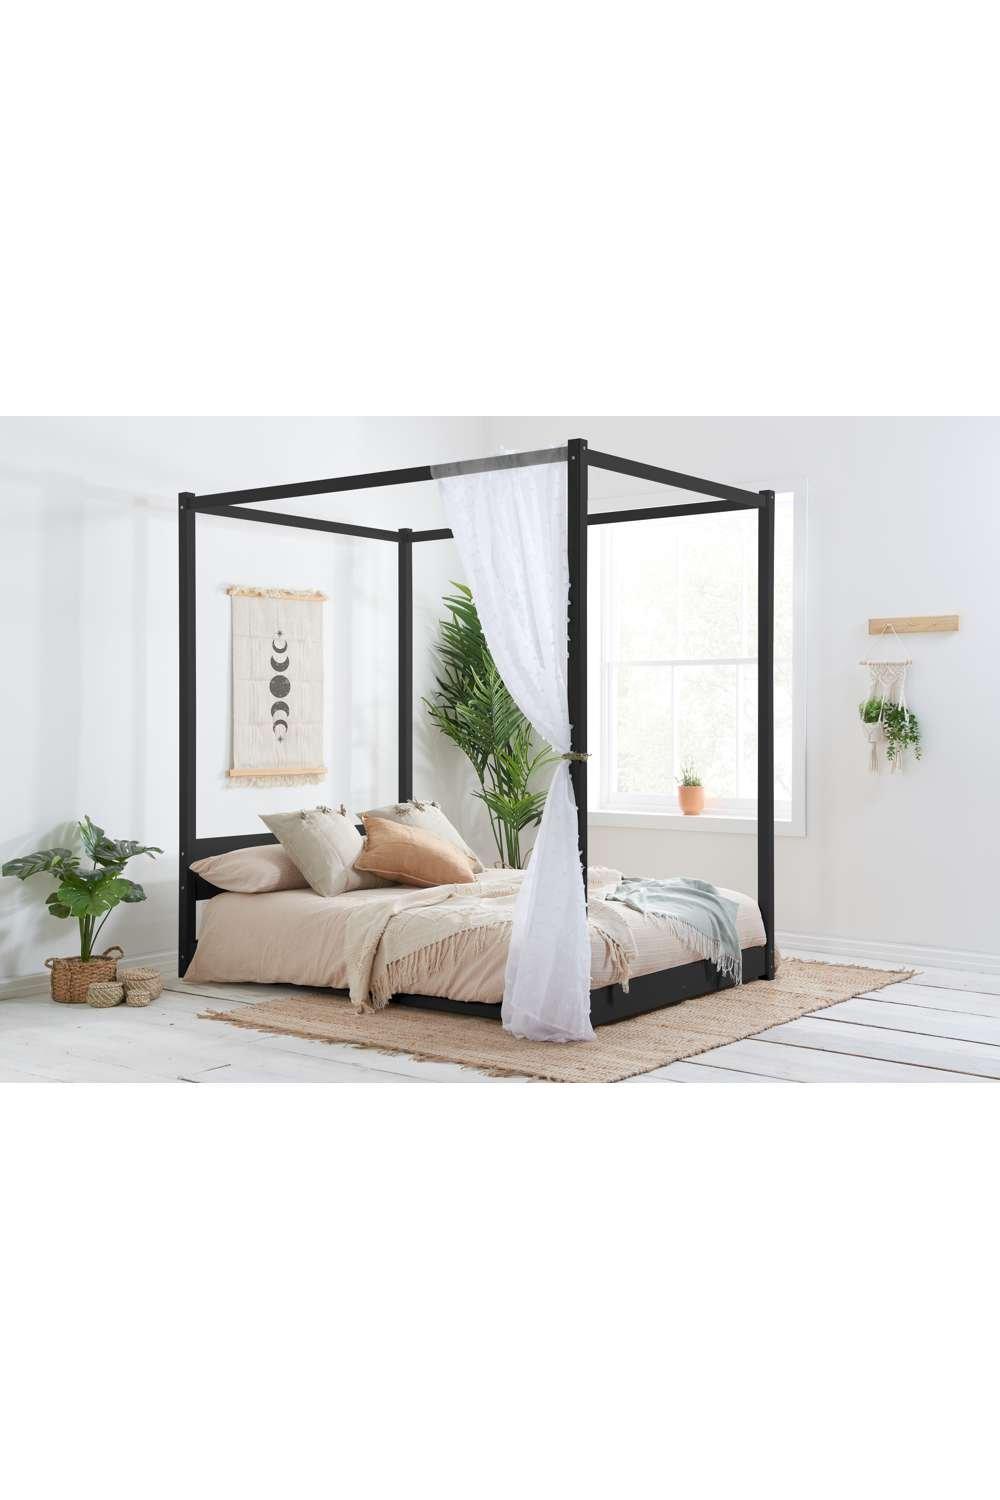 Darwin Four Poster Bed